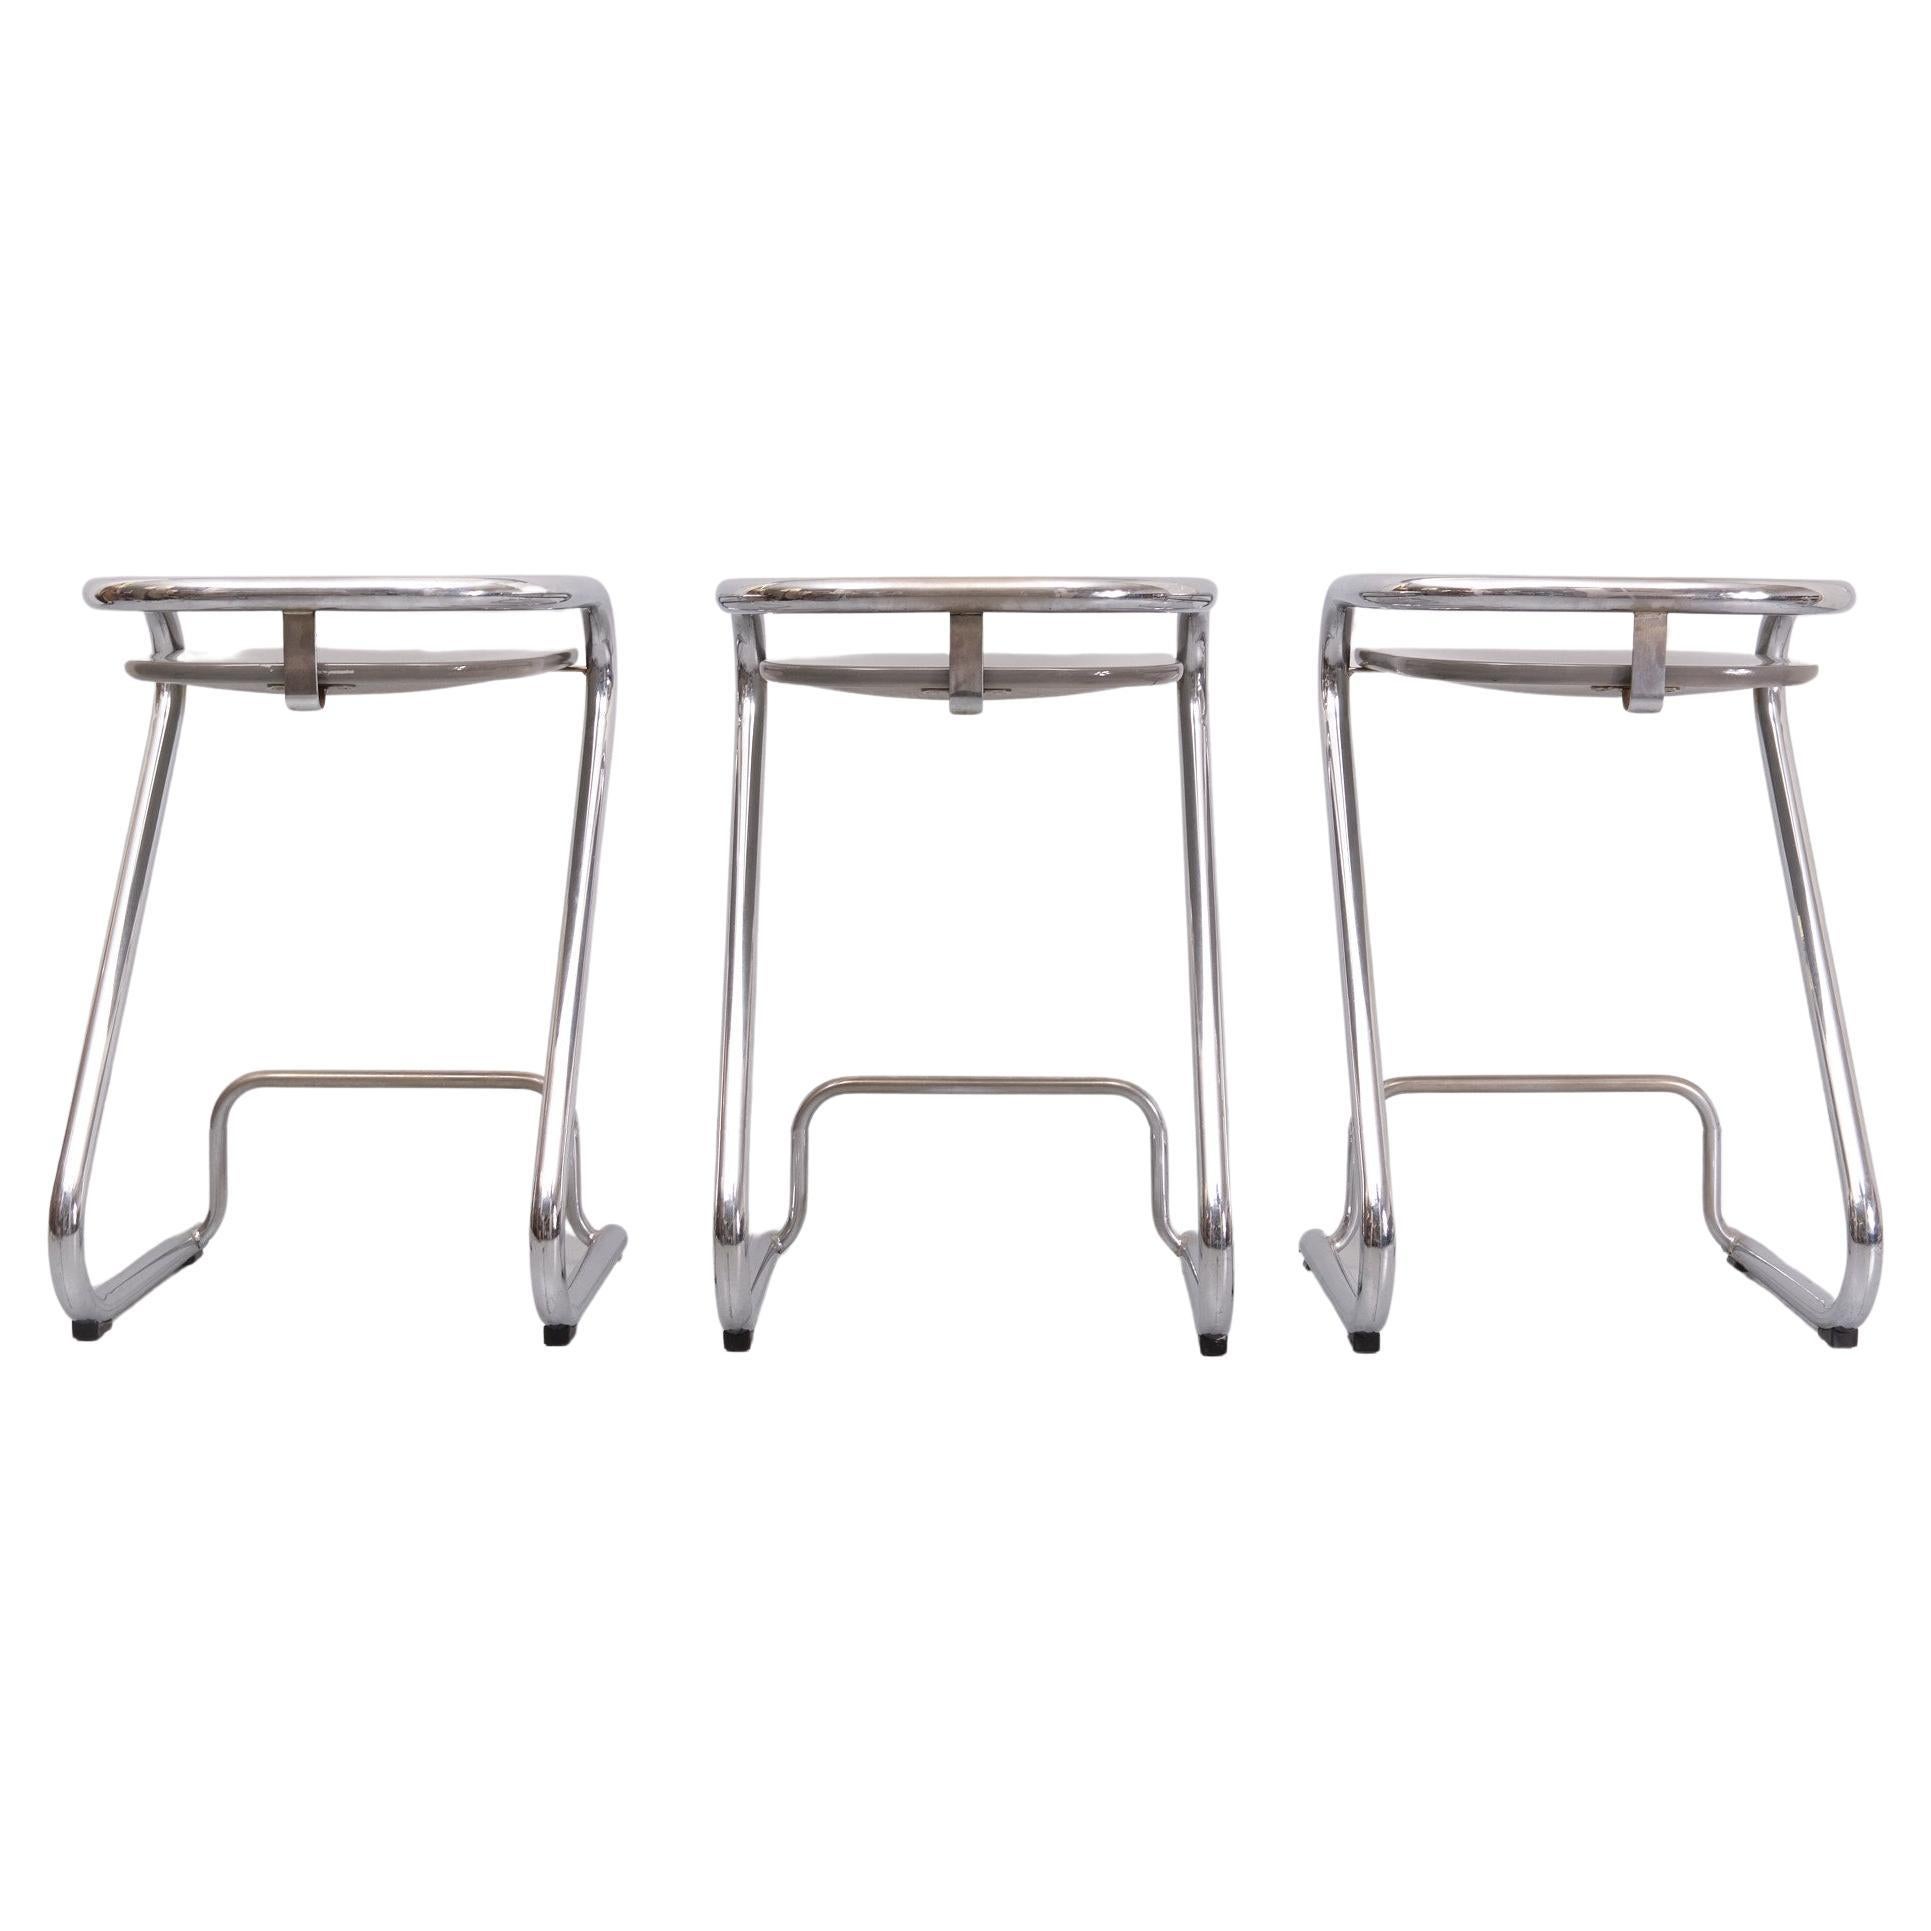 The set of 3 bar stools S 70-3, designed by Lindau and Lindekrantz in 1968 for Lammhults, is in very good condition. The curved chrome is perfect, as are the Grey colored Wooden seat shells. Early 1960s version Lammhults is a Swedish manufacturer